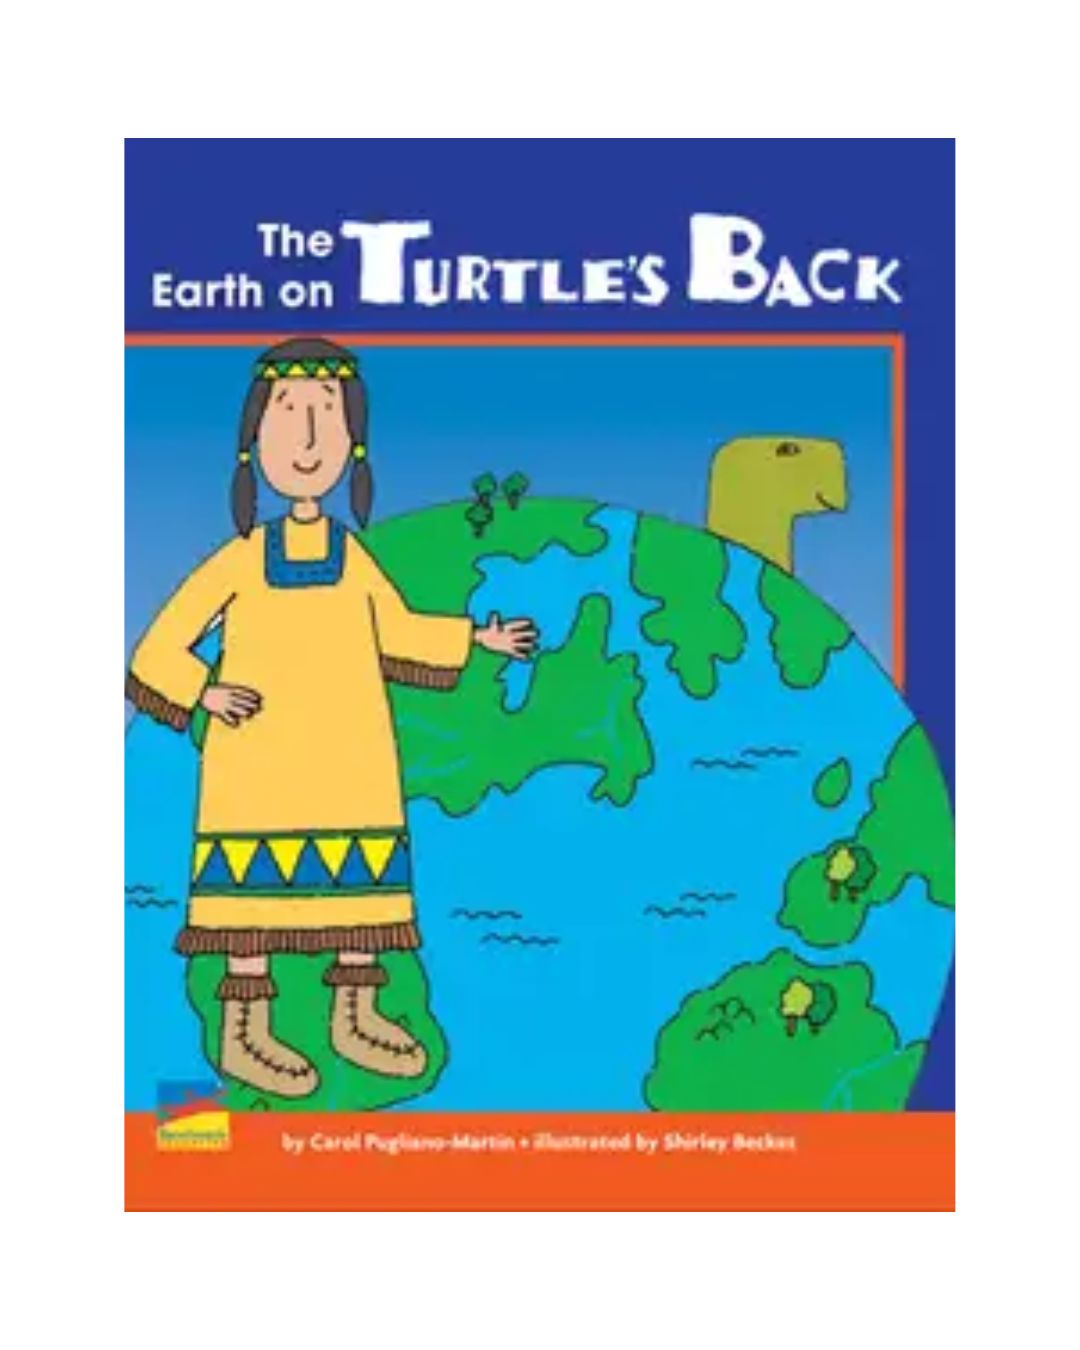 Improve Your Child's Vocabulary - The Earth on Turtle's Back - Original